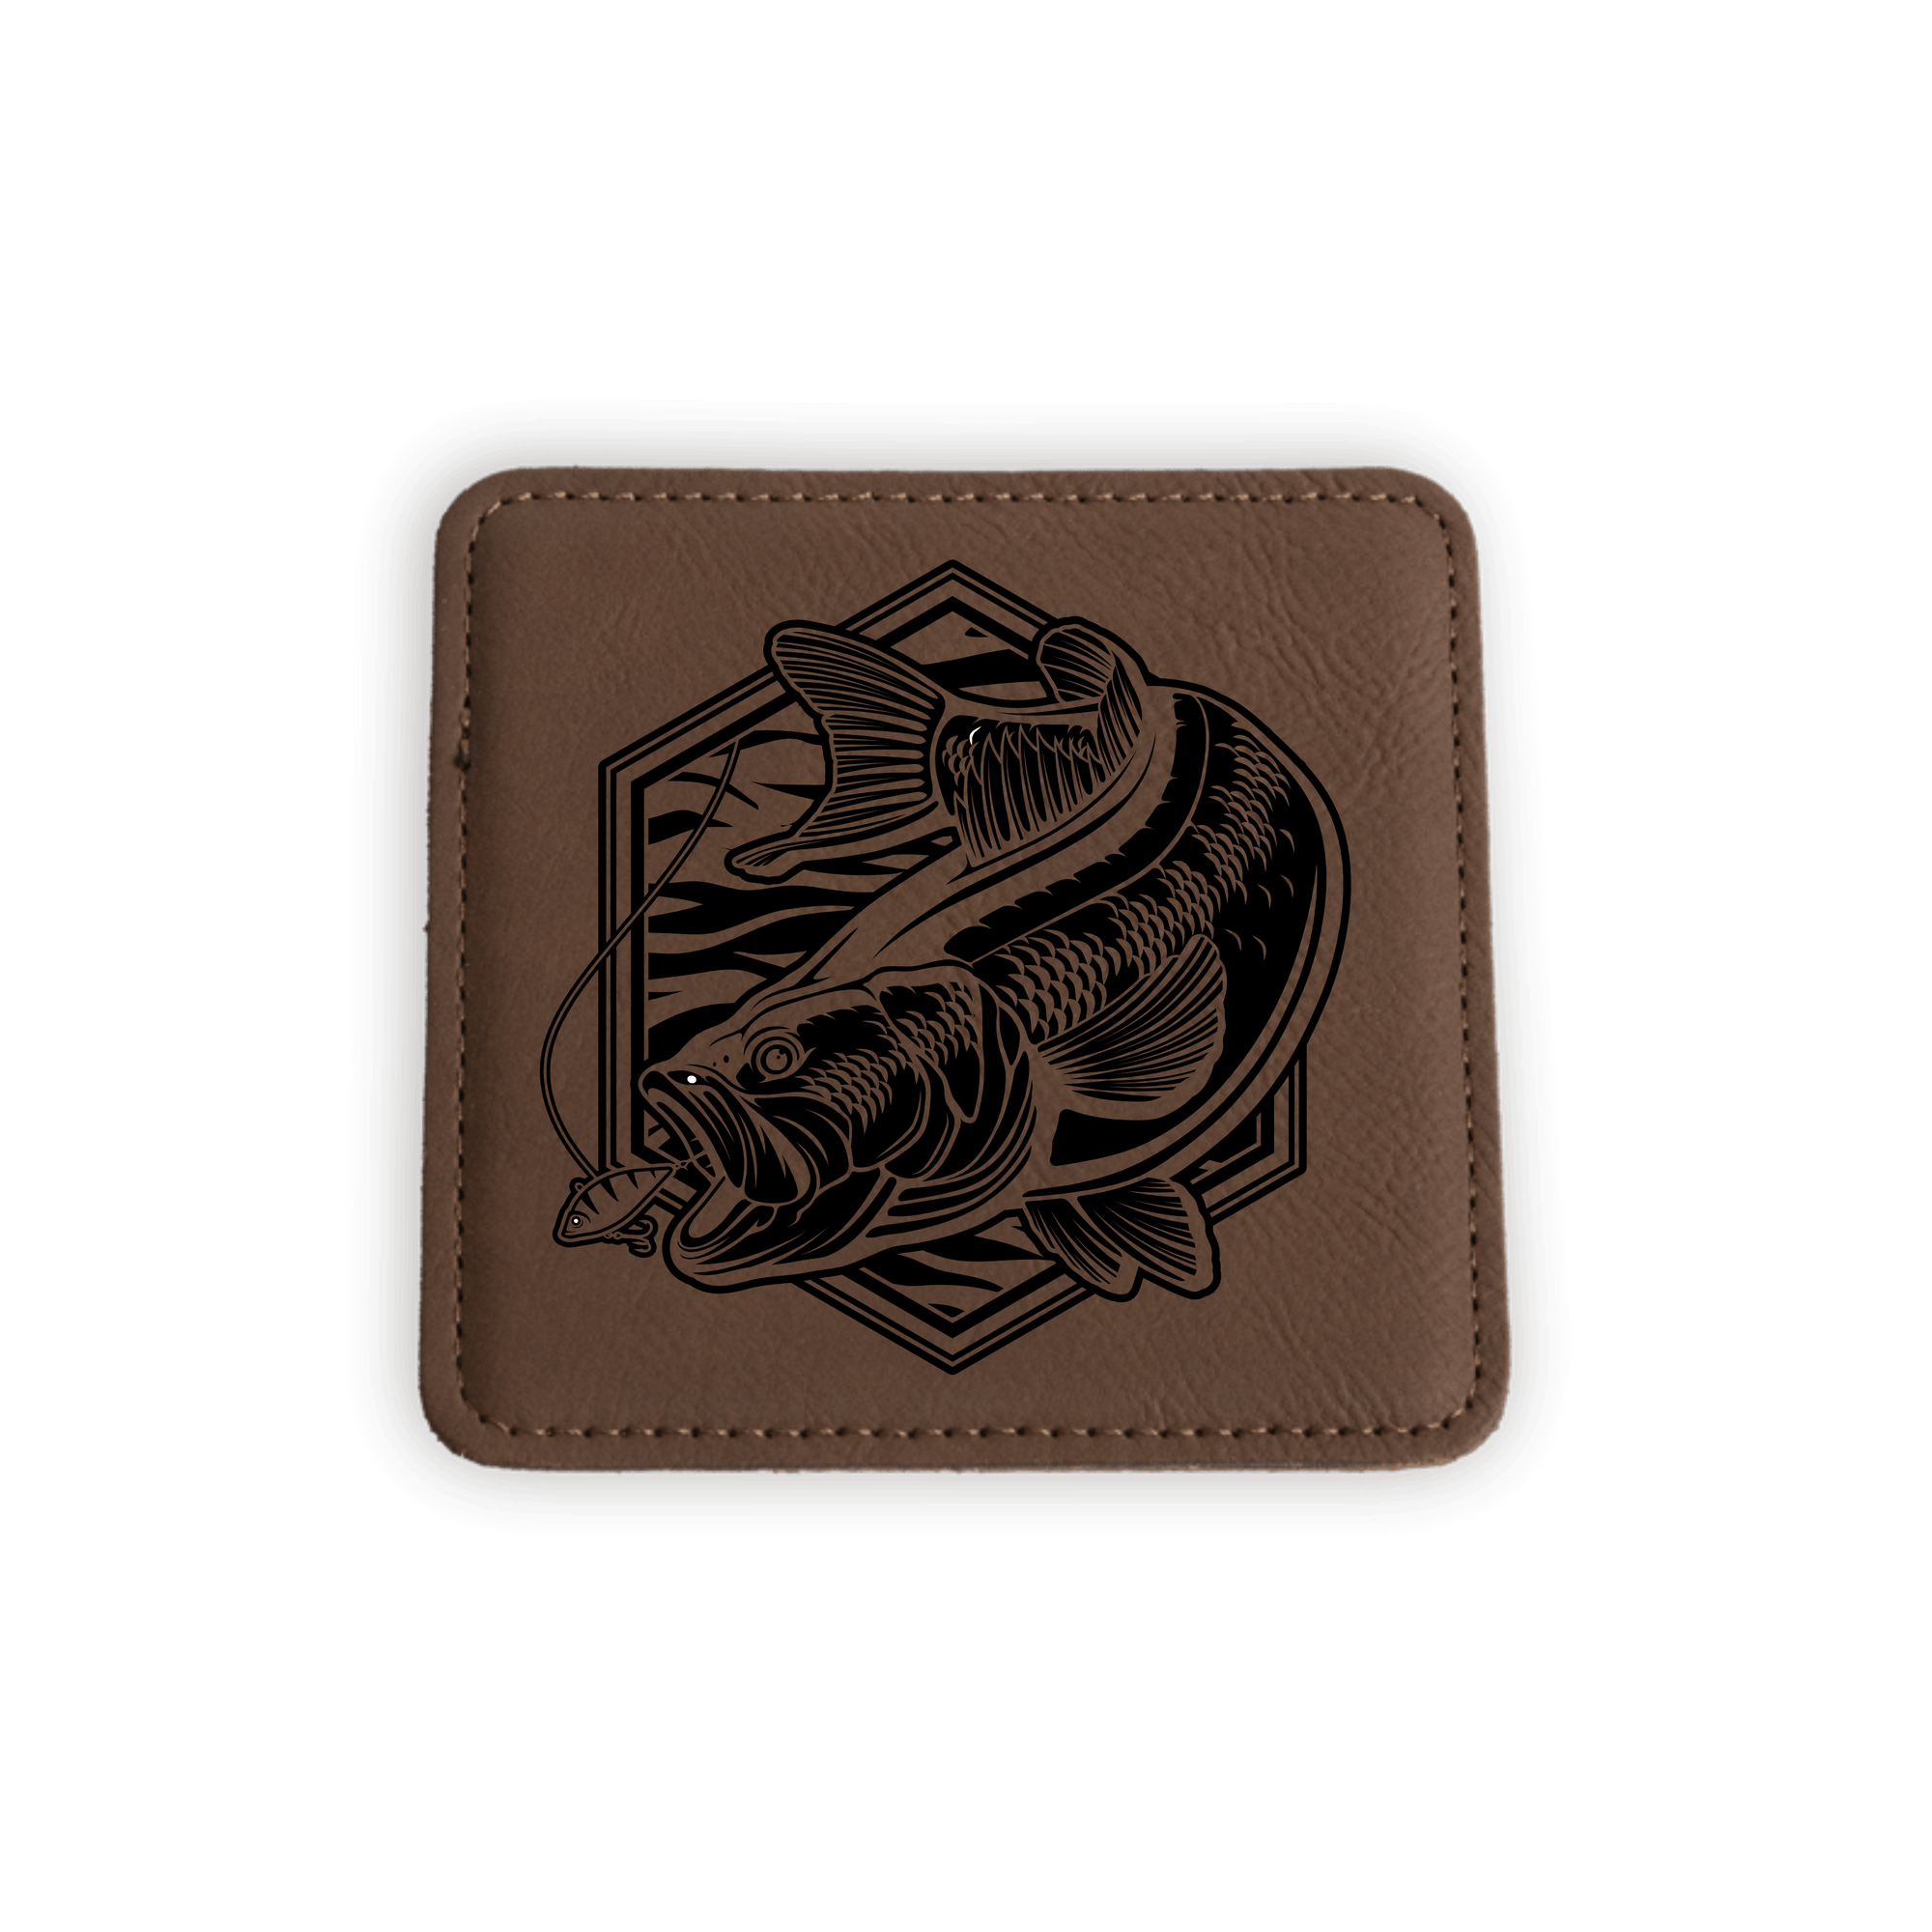 Set of 6 leather bass fishing coasters, color shown here is dark brown leather with black laser engraved bass art by Joel Jensen Art design